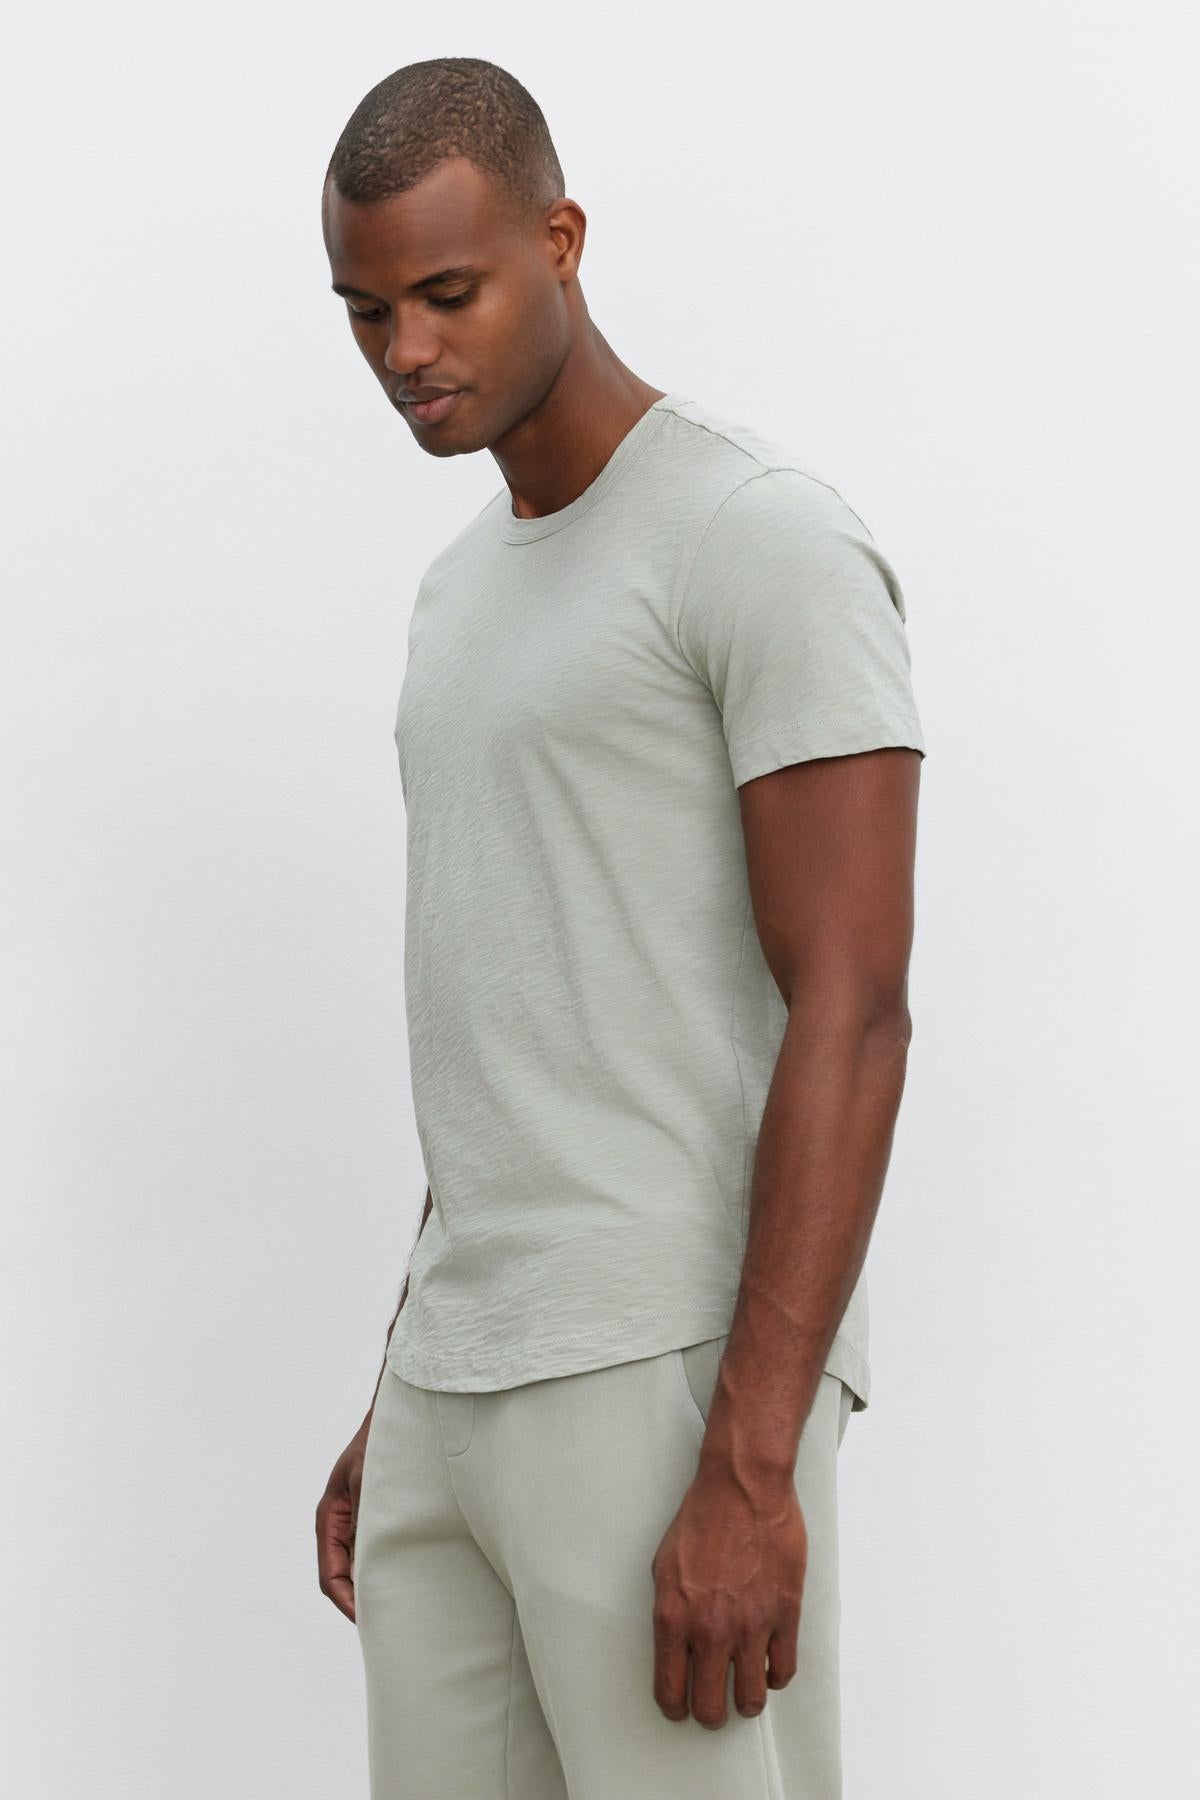 A man in a light grey Velvet by Graham & Spencer AMARO TEE and matching pants stands sideways against a plain white background, looking down, embodying a relaxed and stylish feel.-37469132128449